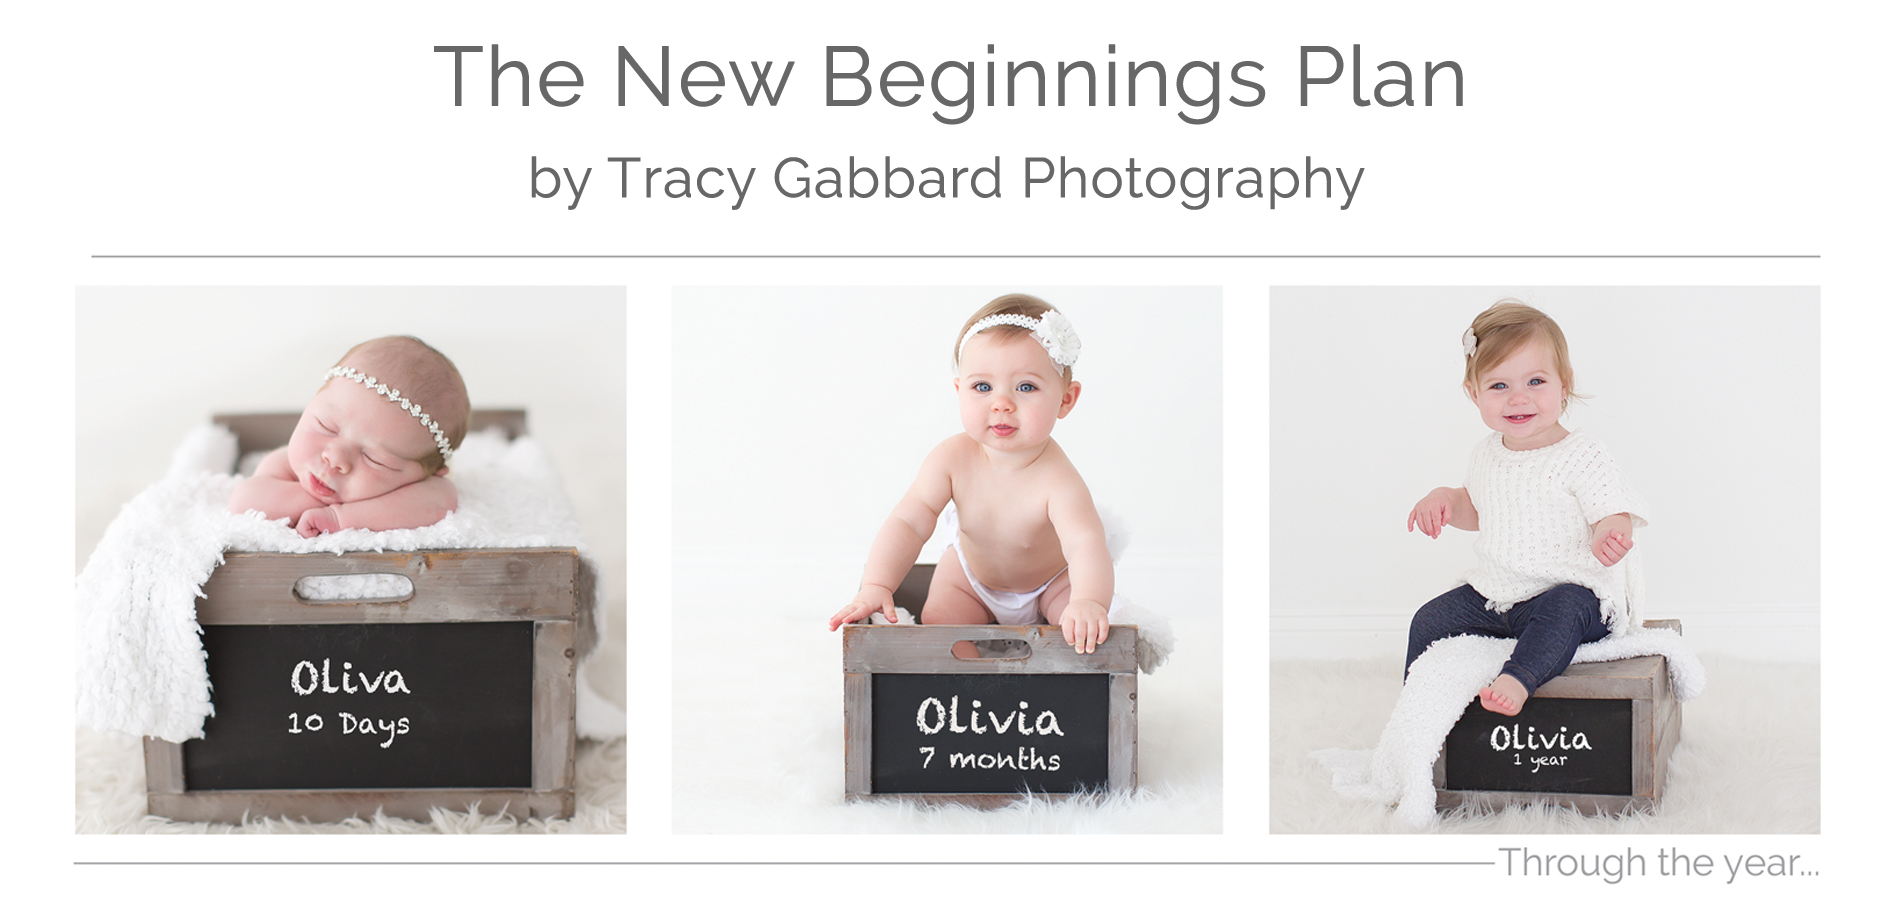 The New Beginnings Plan by Tracy Gabbard Photography